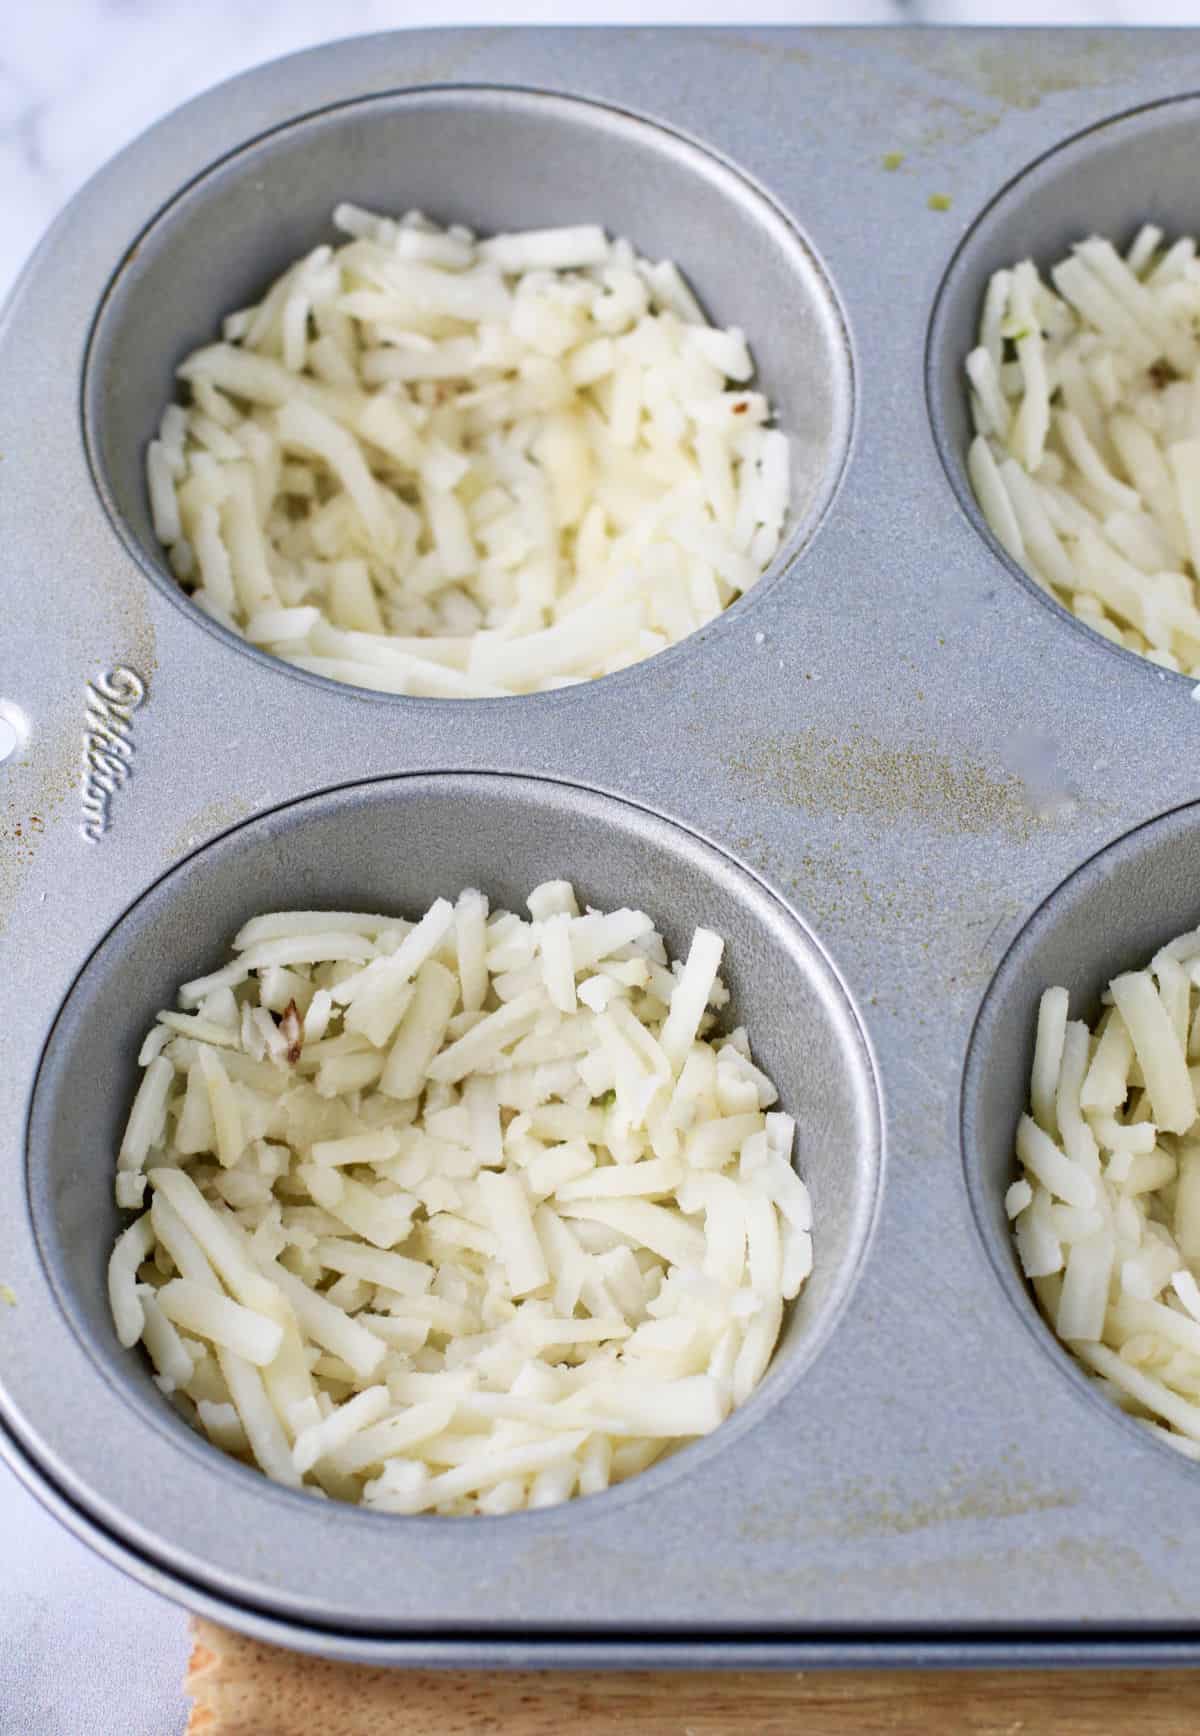 Hash brown potatoes pressed into a muffin tin before baking.